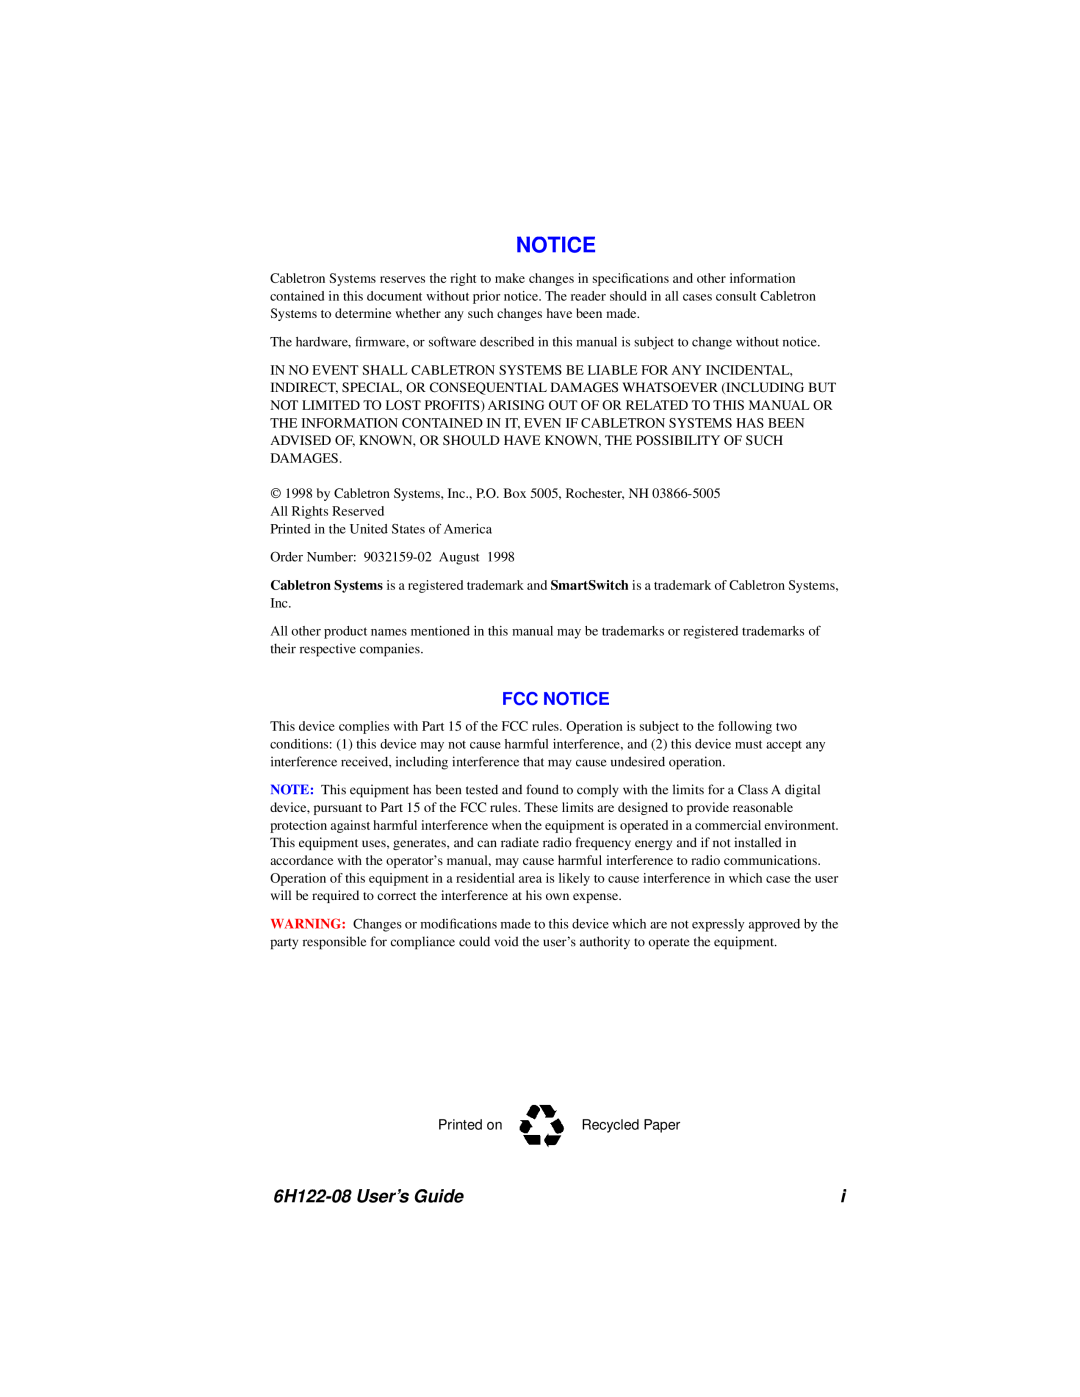 Cabletron Systems manual Fcc Notice, 6H122-08 User’s Guide 